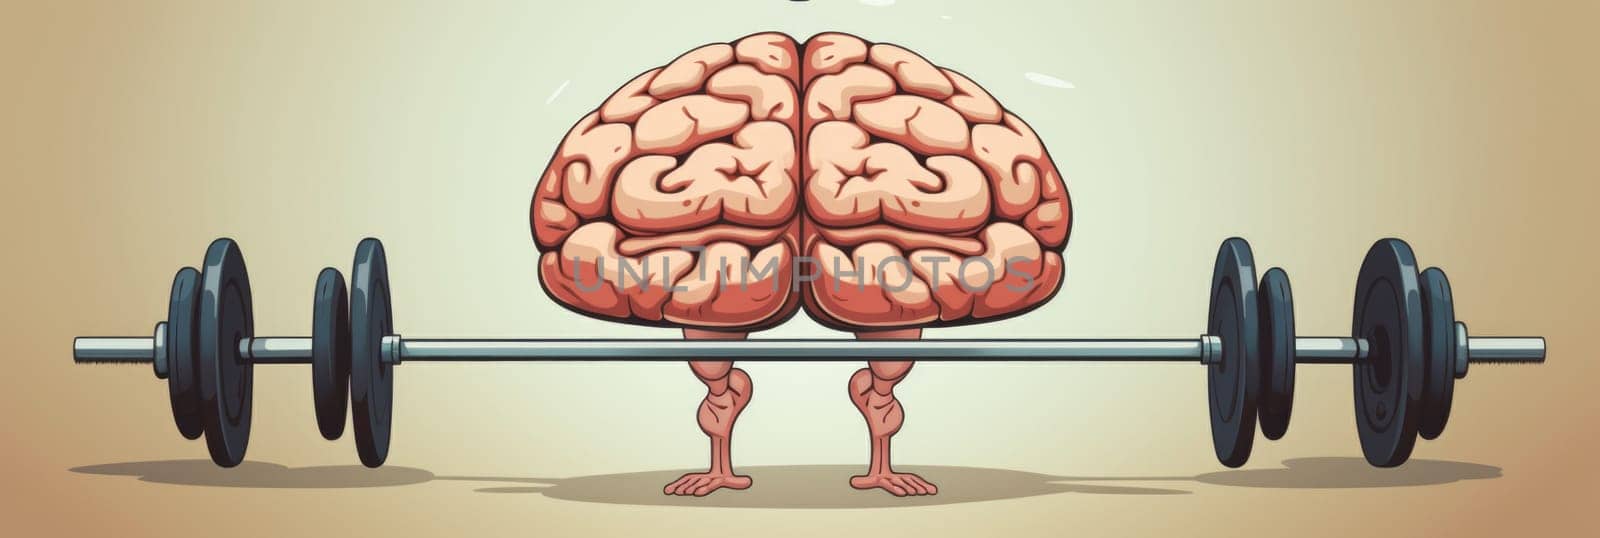 A cartoon image of a brain flexing its muscles while lifting a barbell.